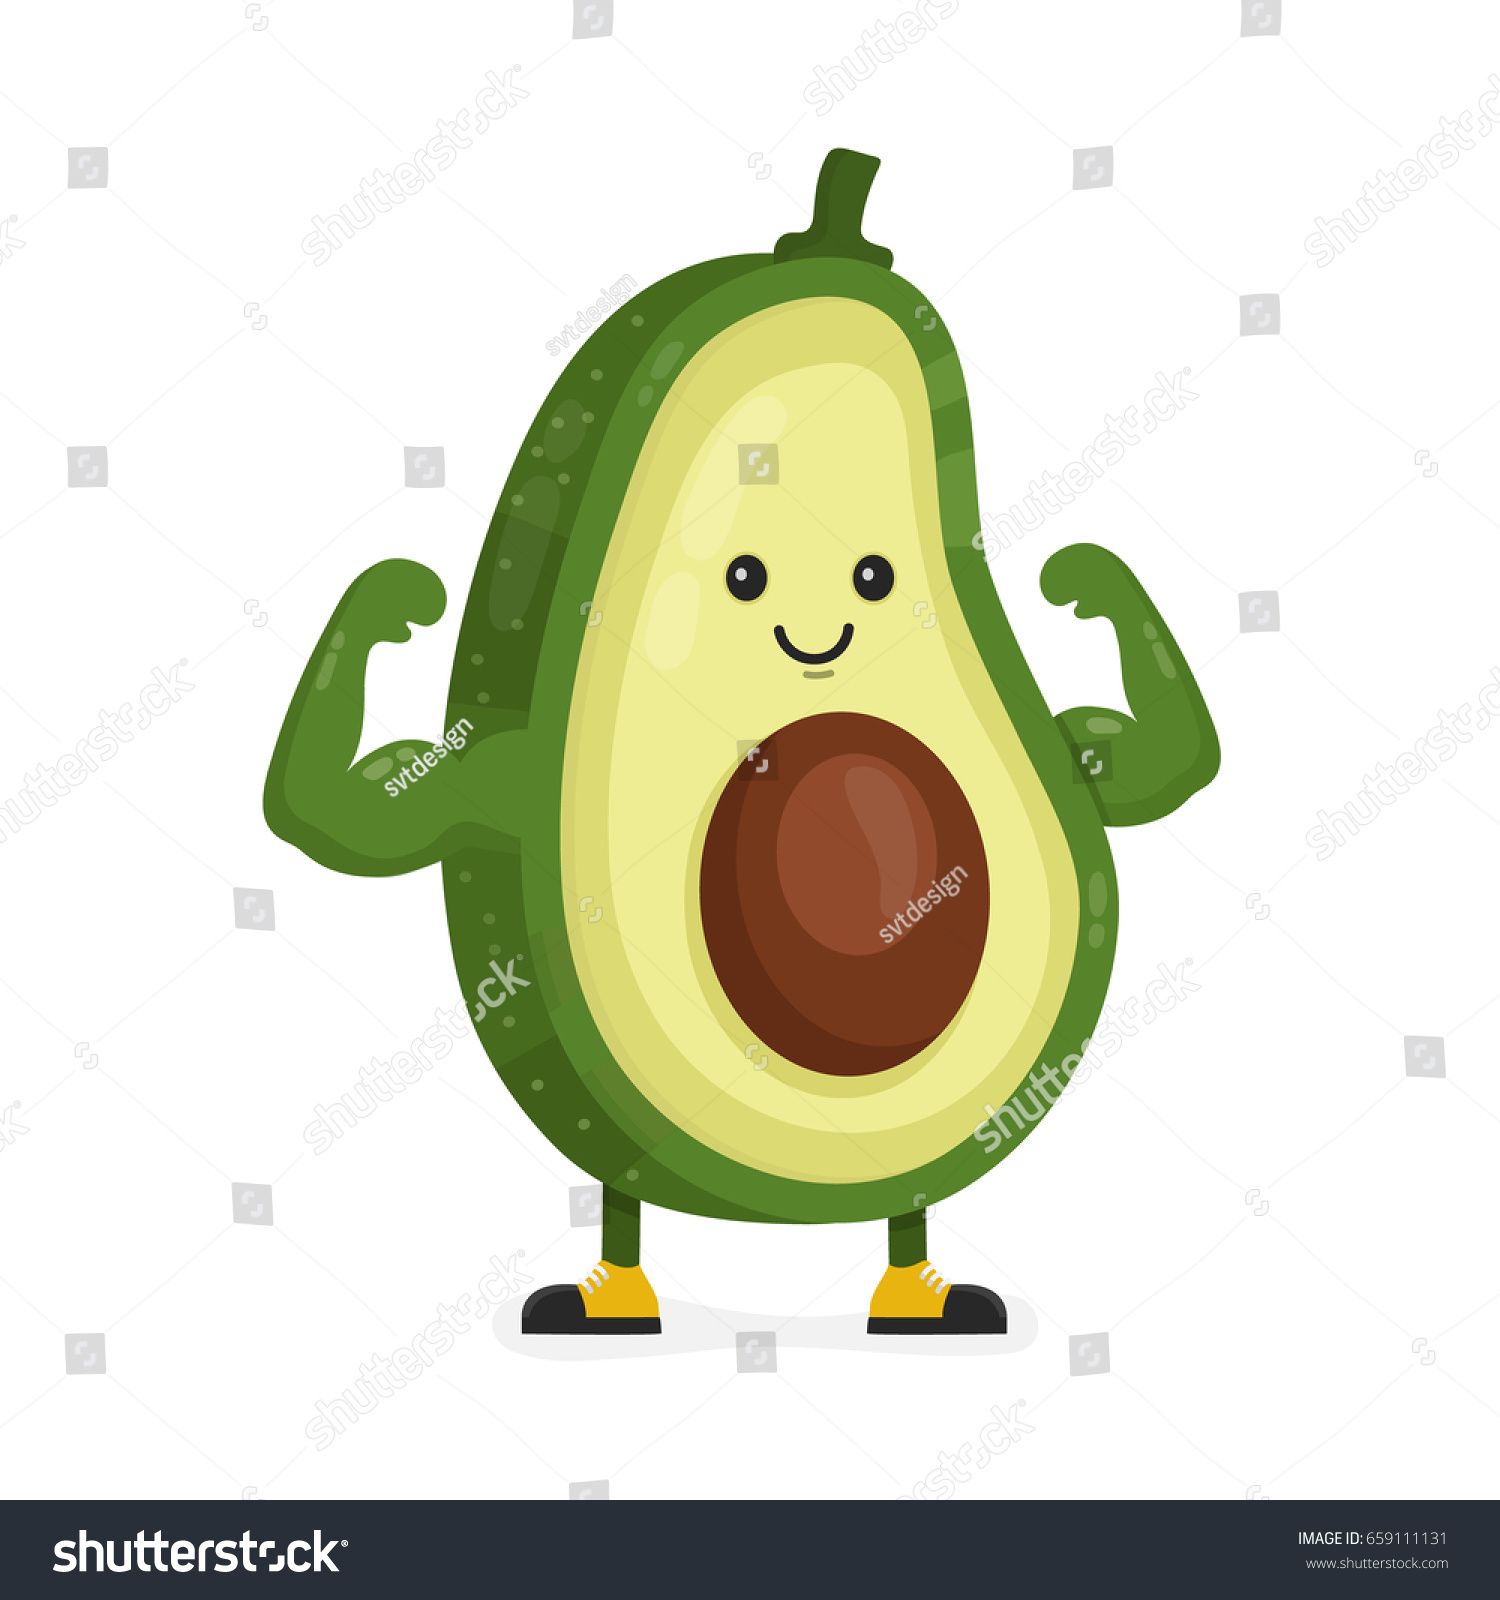 Avocado clipart single vegetable. Cute happy strong smiling